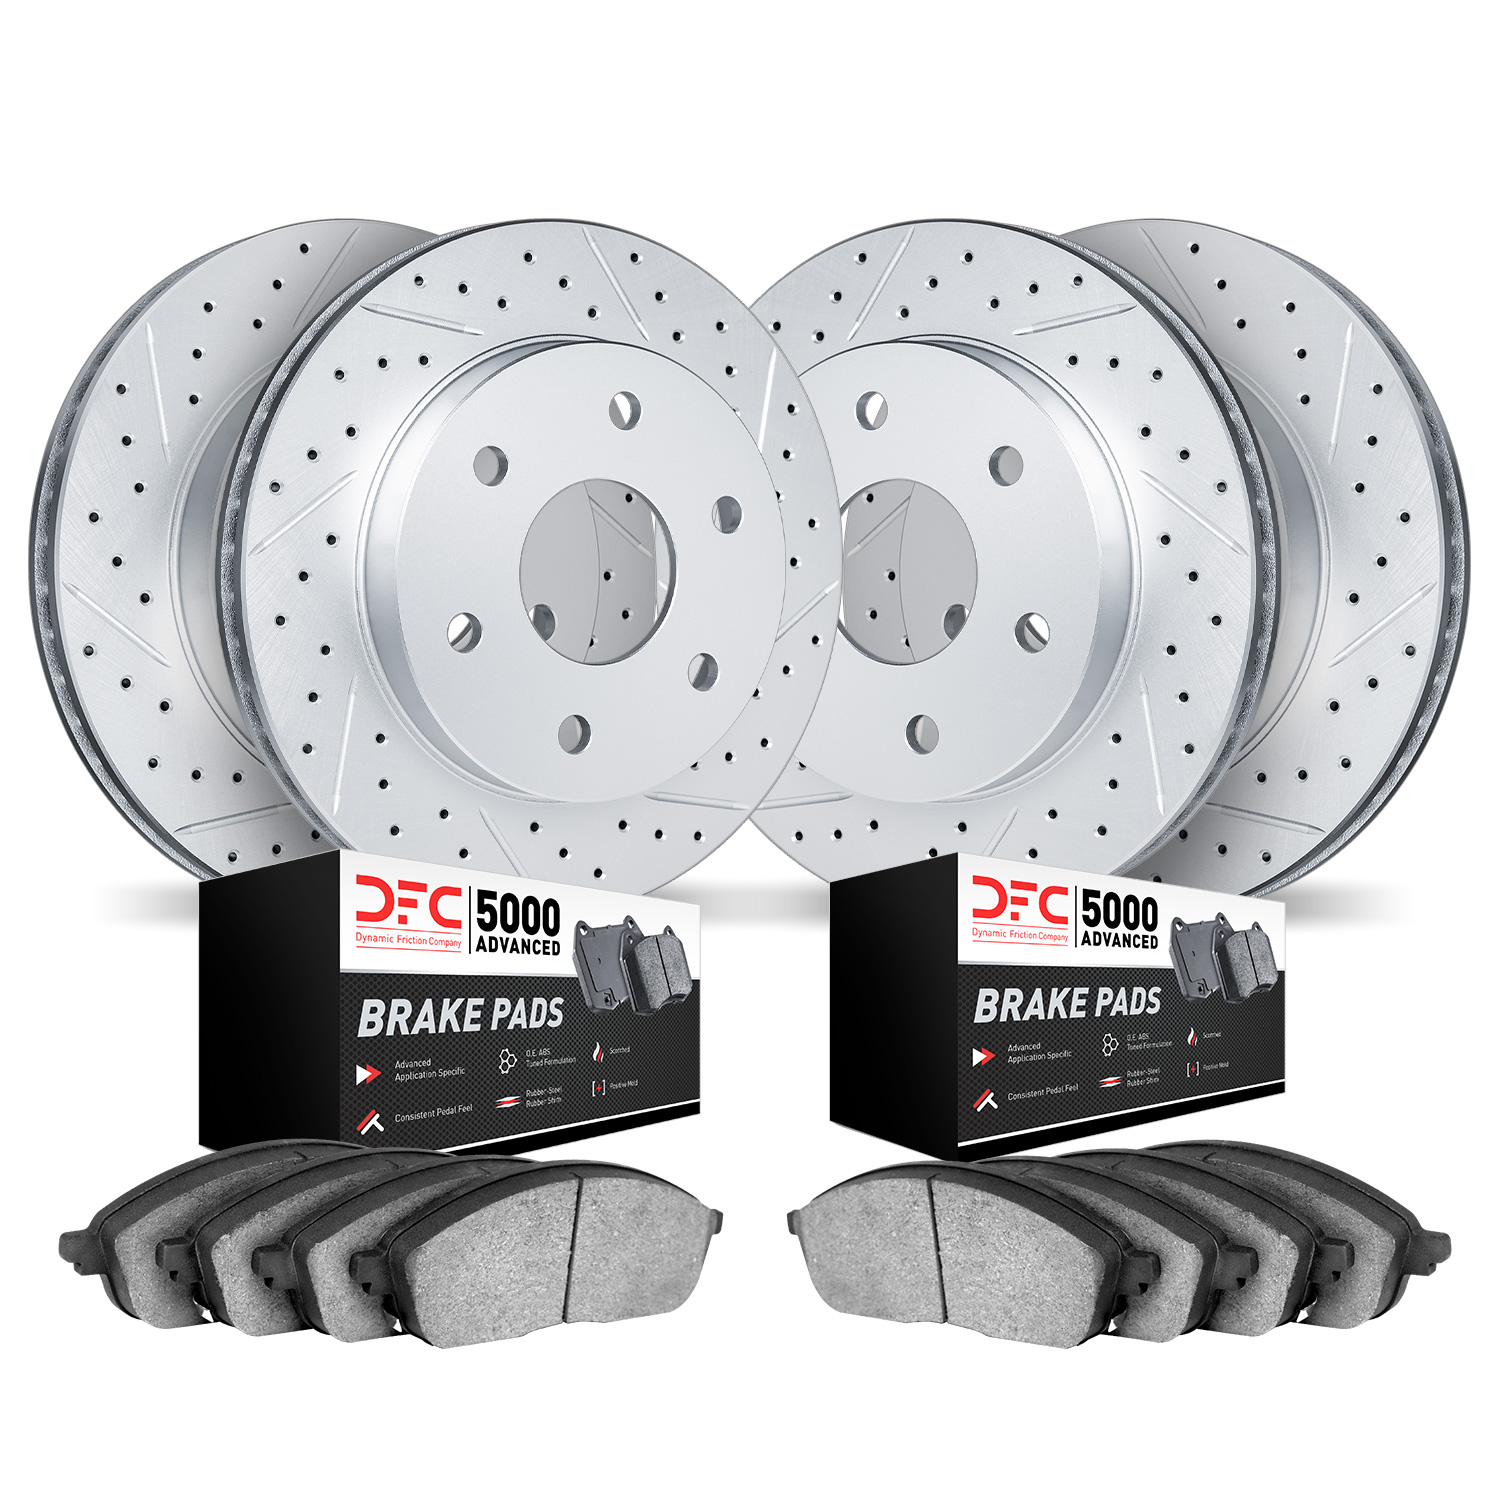 2504-48034 Geoperformance Drilled/Slotted Rotors w/5000 Advanced Brake Pads Kit, 2006-2009 GM, Position: Front and Rear